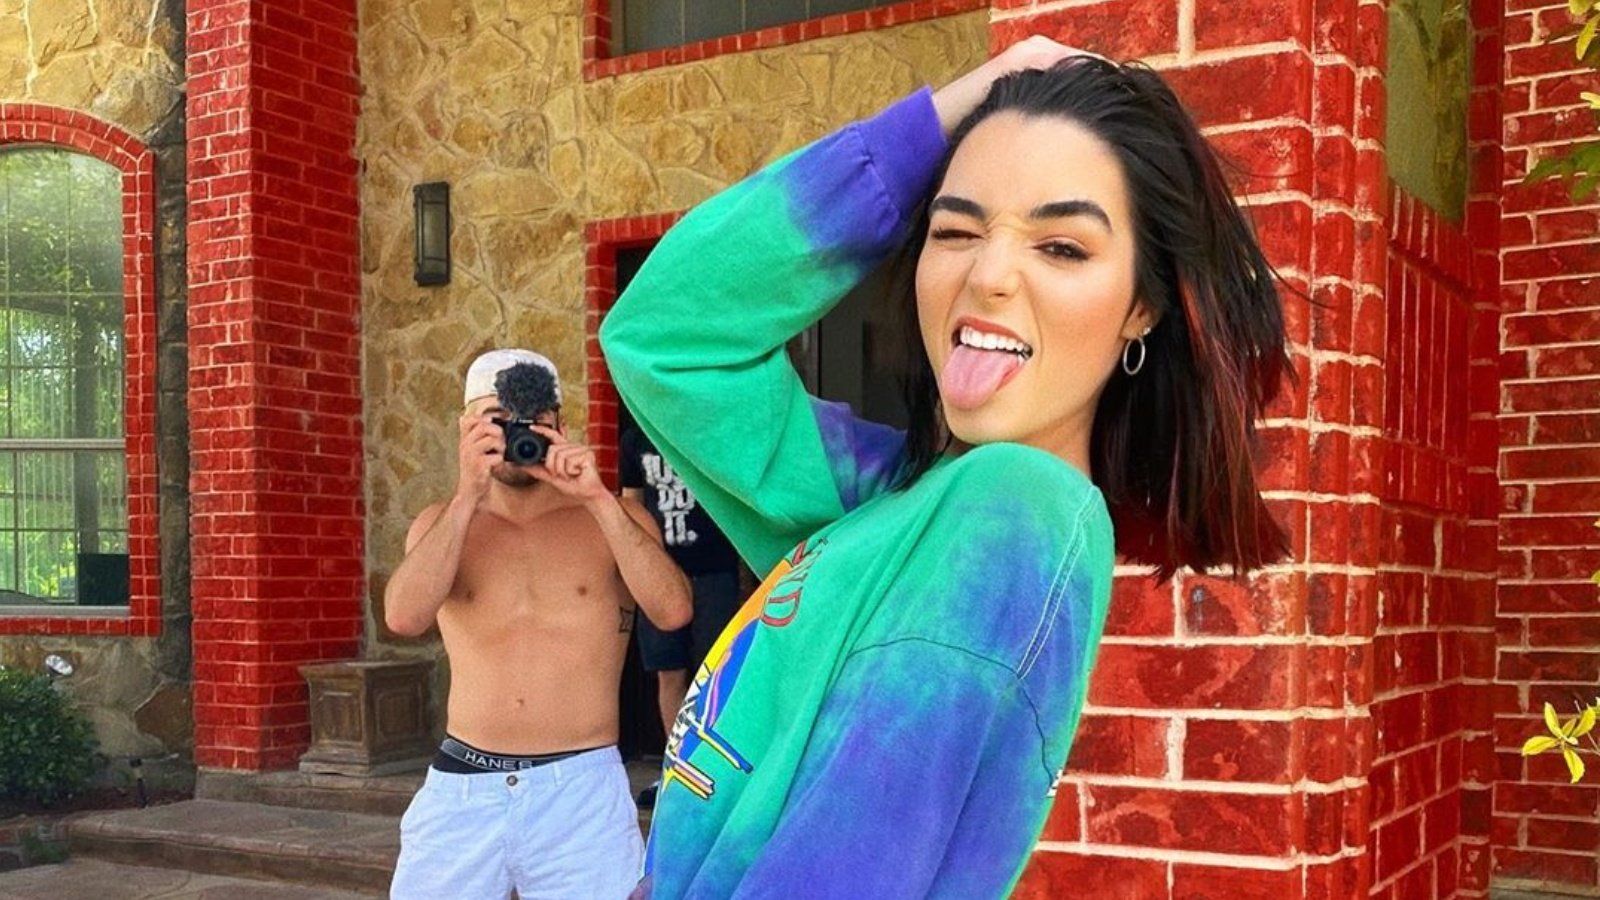 TikTok star Indiana fuels rumors that she's joining the Hype House